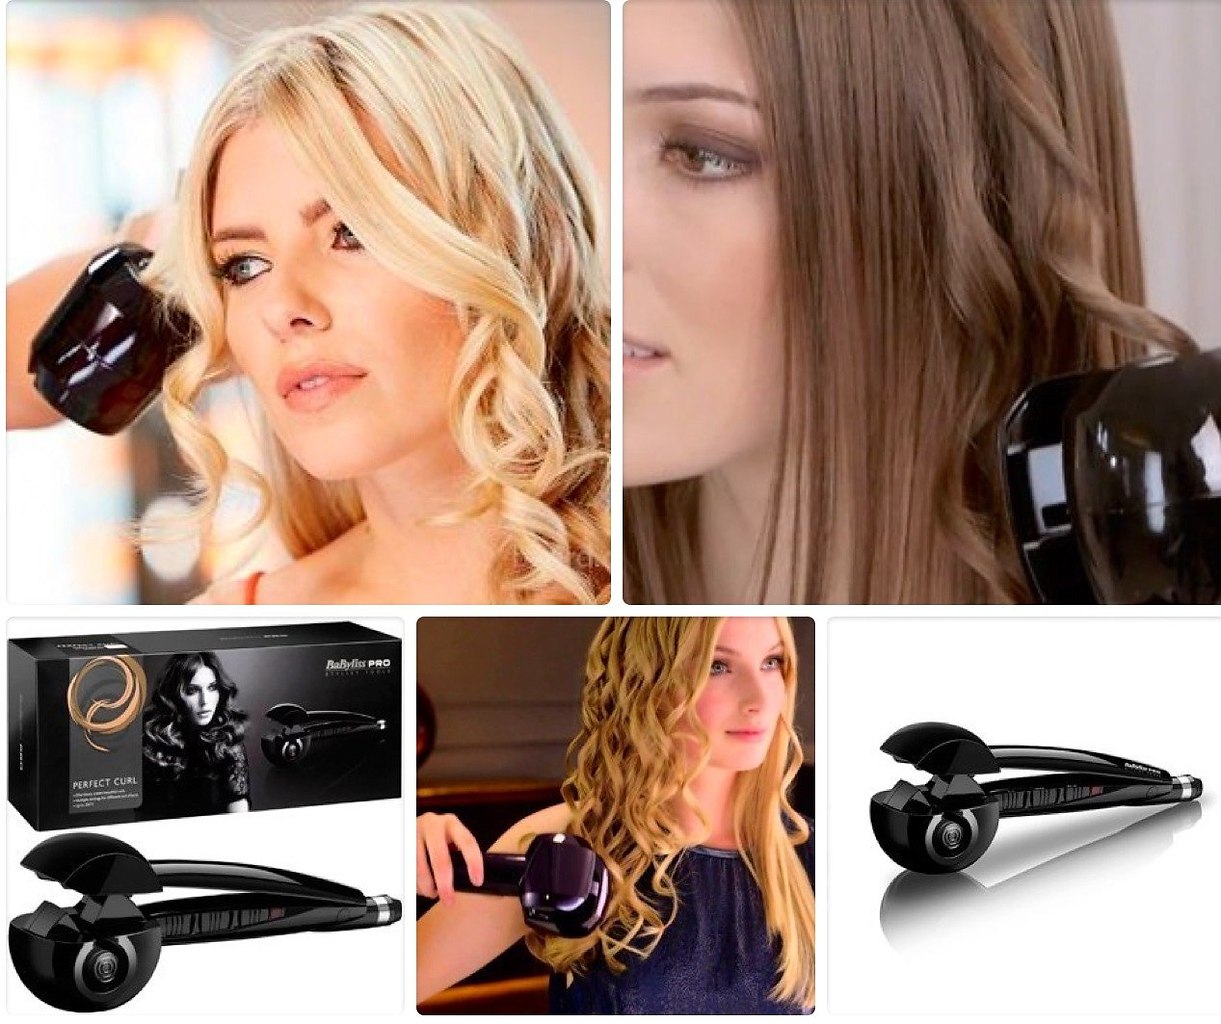 Babyliss pro curl. Стайлер BABYLISS Pro perfect Curl. Стайлер BABYLISS Pro Curl. Плойка BABYLISS Pro Curl. Стайлер BABYLISS 2664pre.